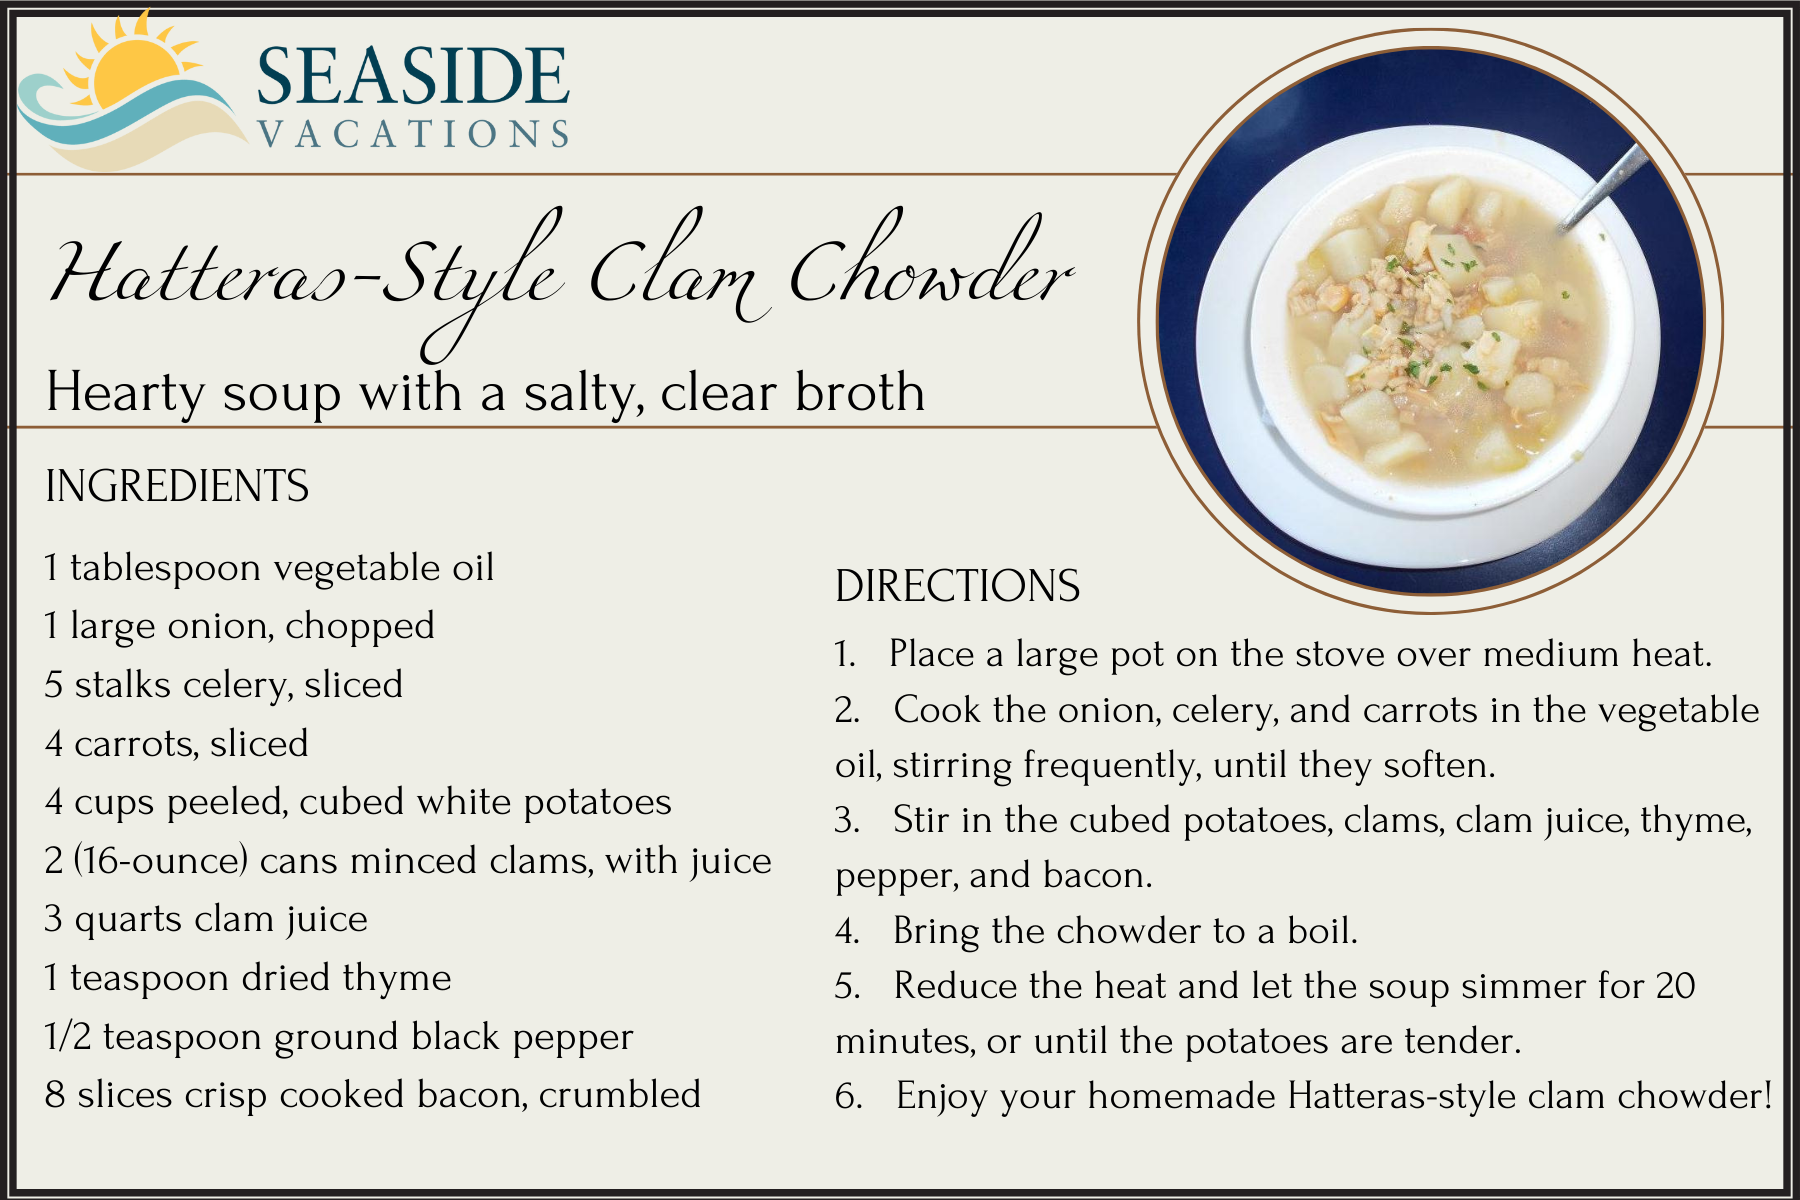 Seaside Vacations Hatteras-Style Clam Chowder Recipe Card